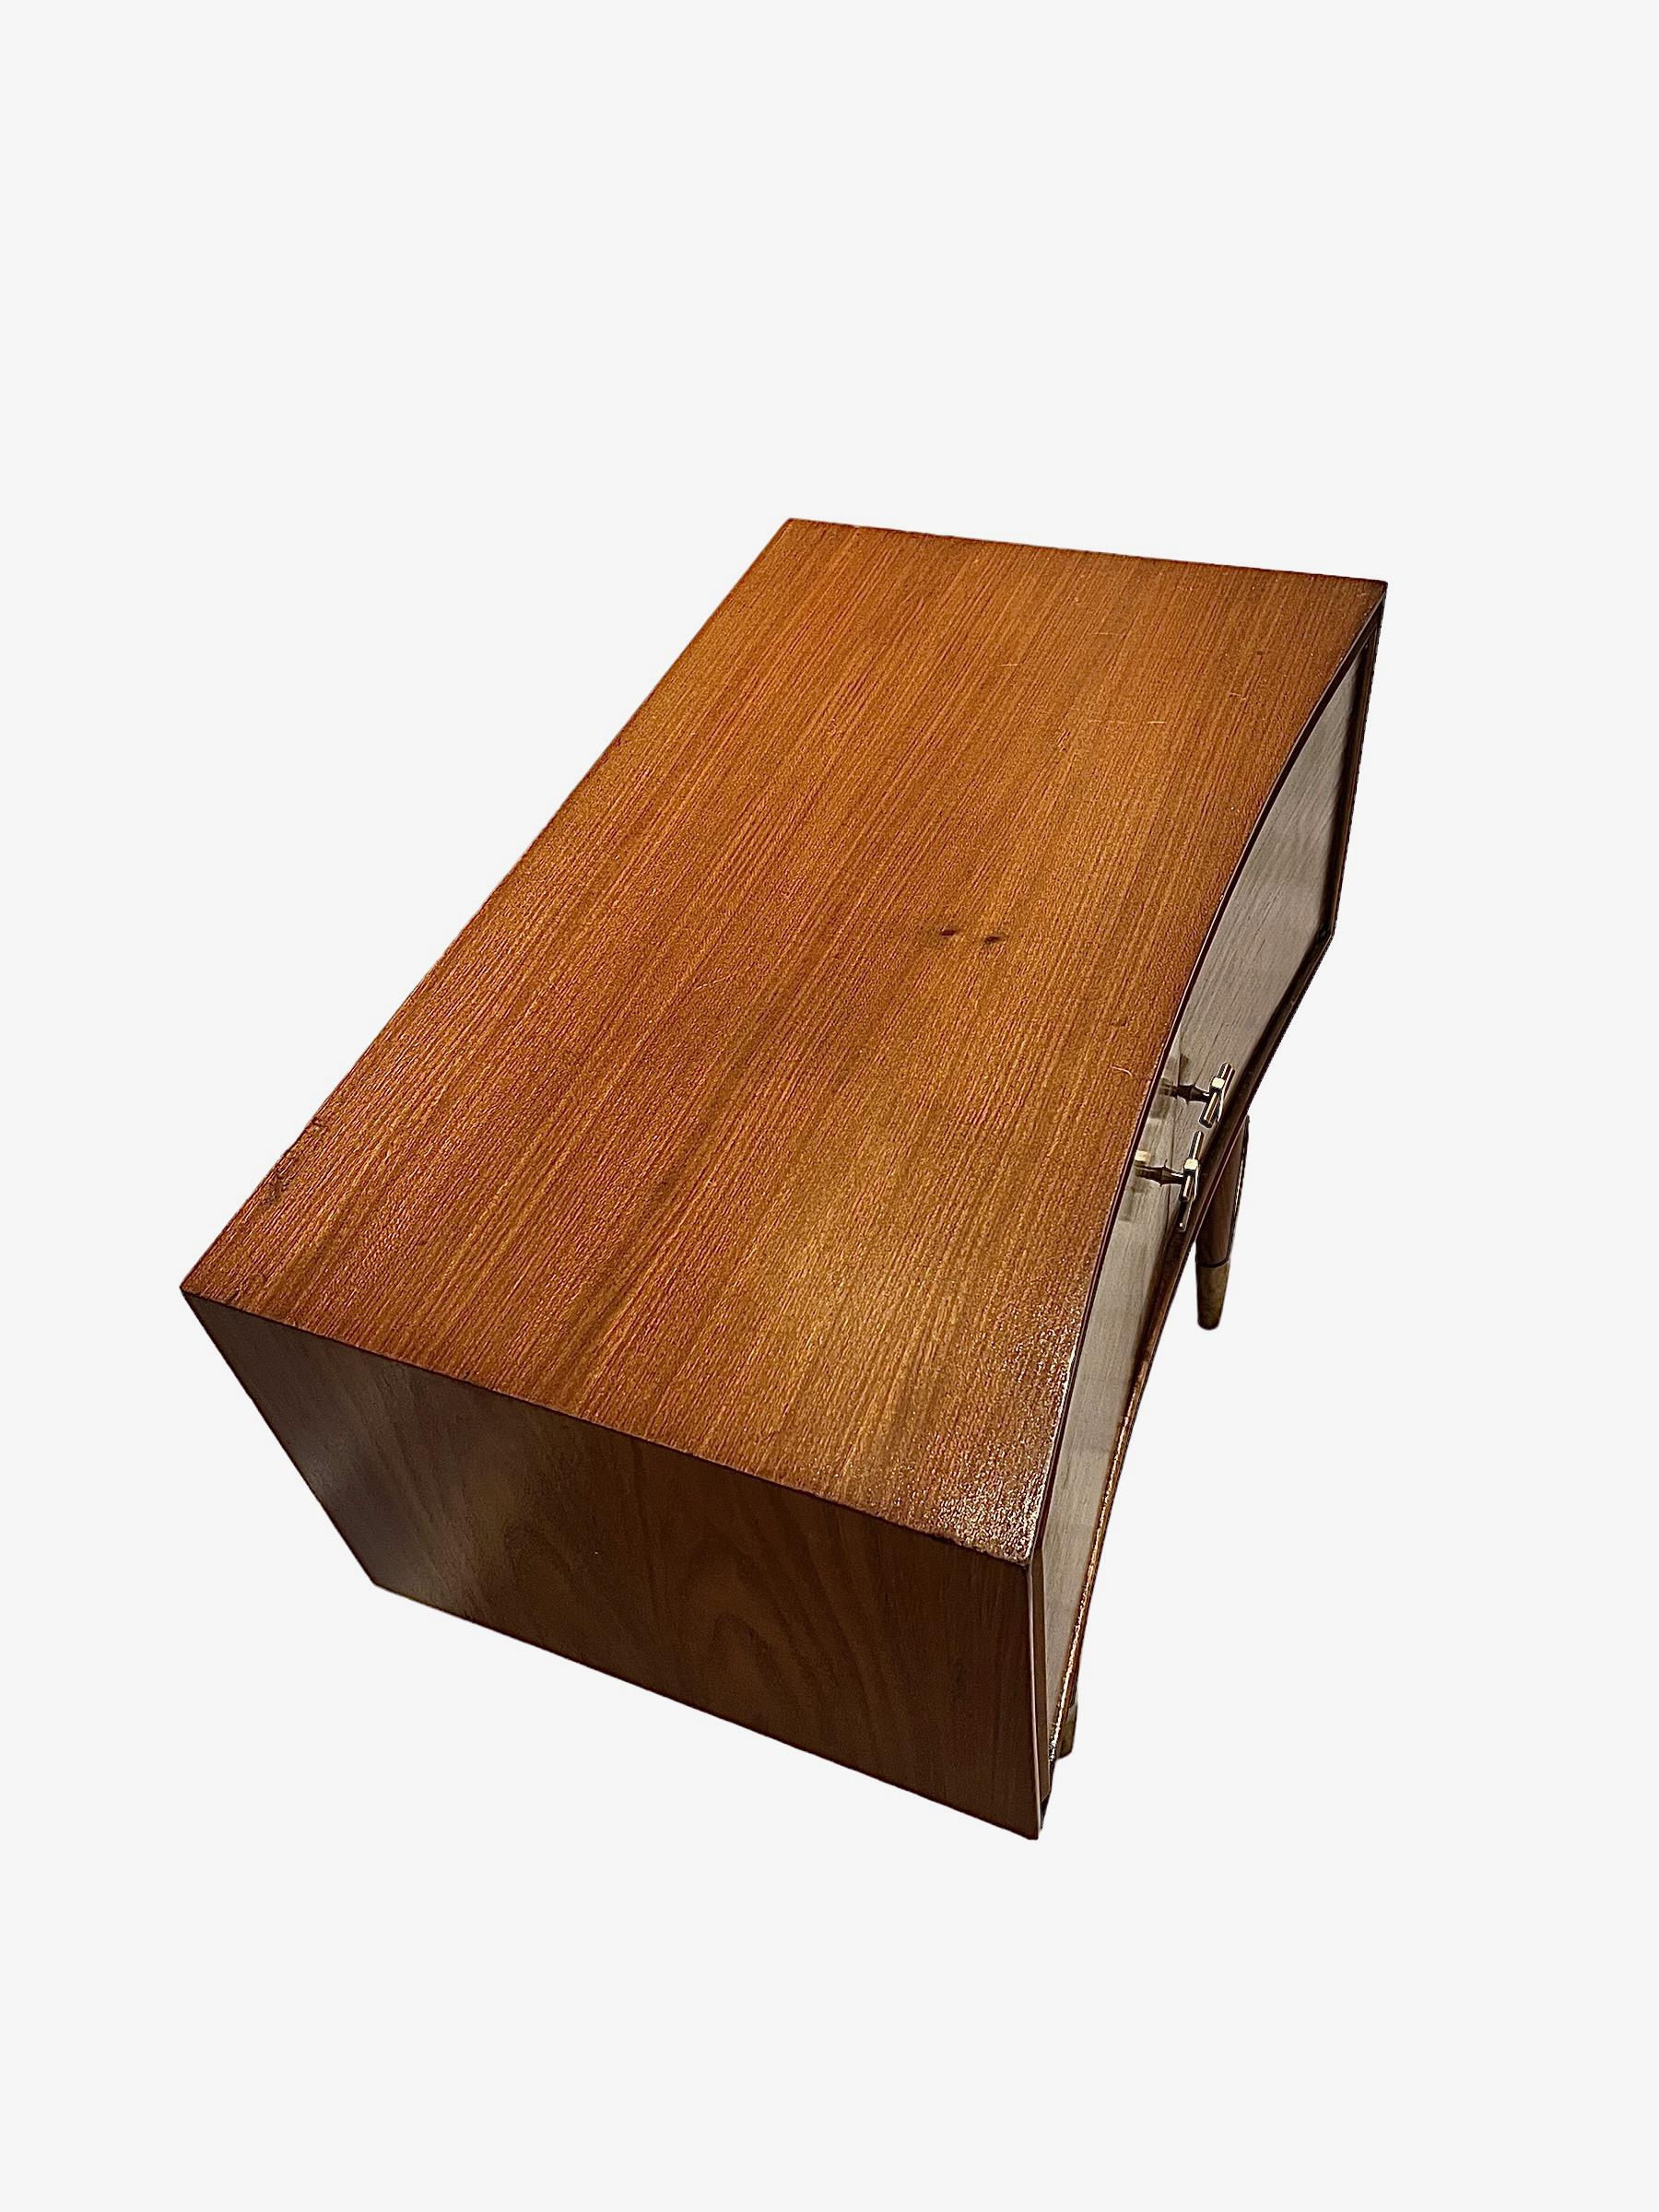 Pair of Night Stands Made of Rosewood, circa 1960, Mid-Century Modern For Sale 3